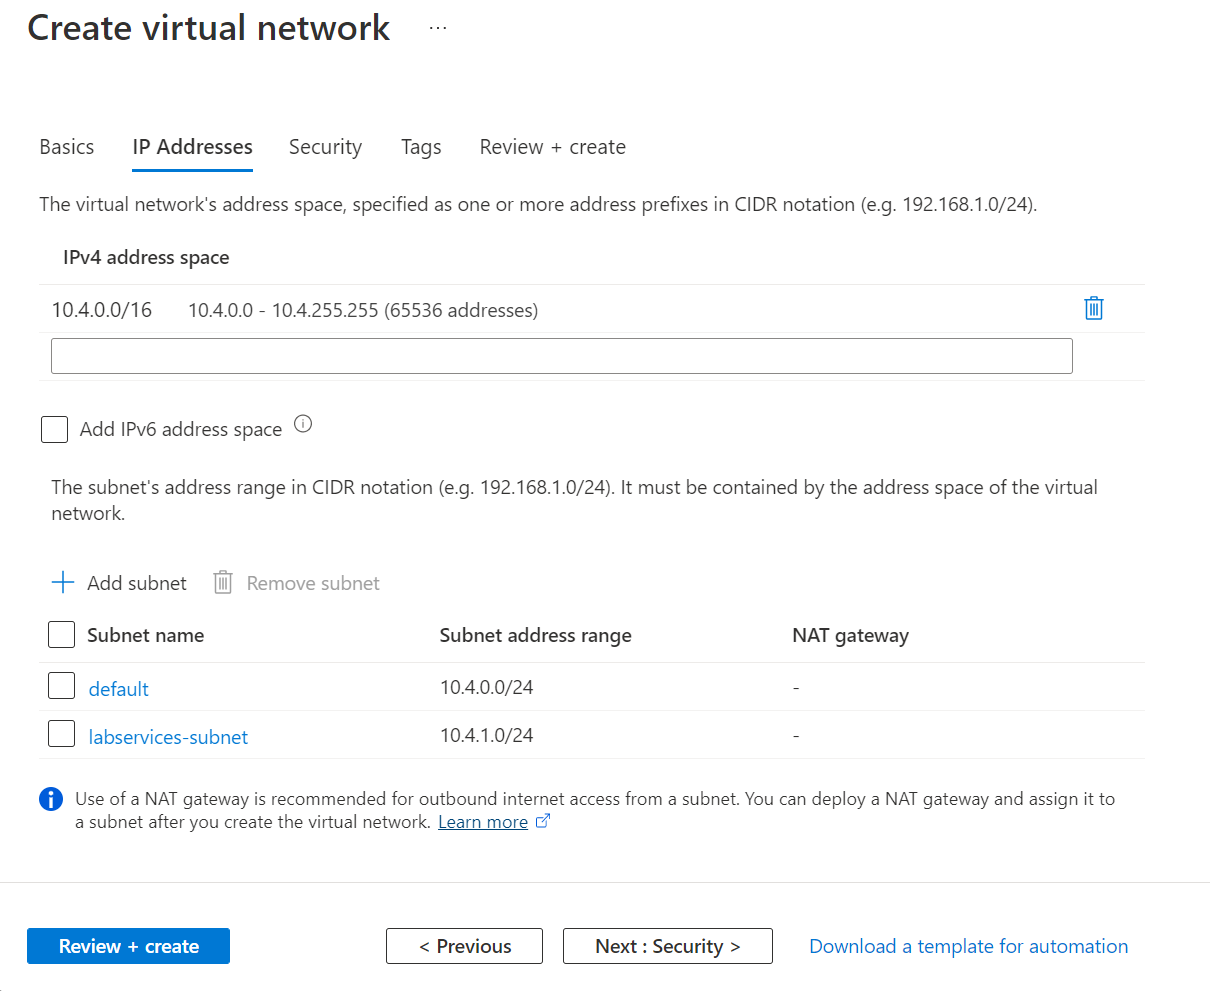 Screenshot of IP addresses tab of the Create virtual network page in the Azure portal.